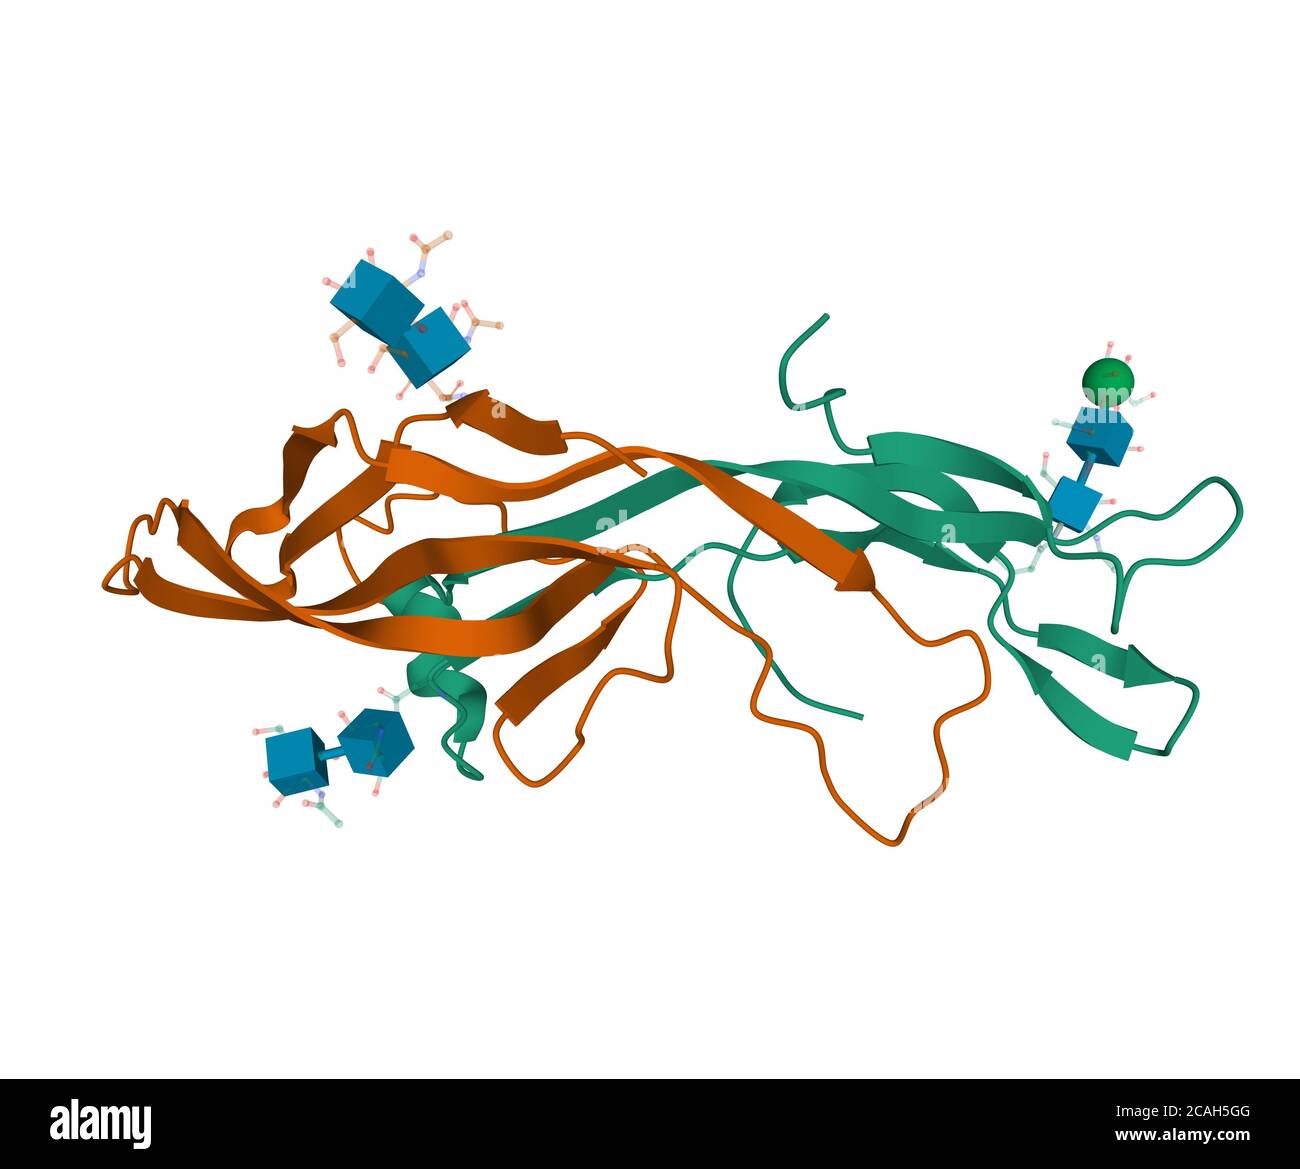 Recombinant human follicle-stimulating hormone with shown carbohydrate molecules attached, 3D-model of the heterodimer quaternary structure Stock Photo